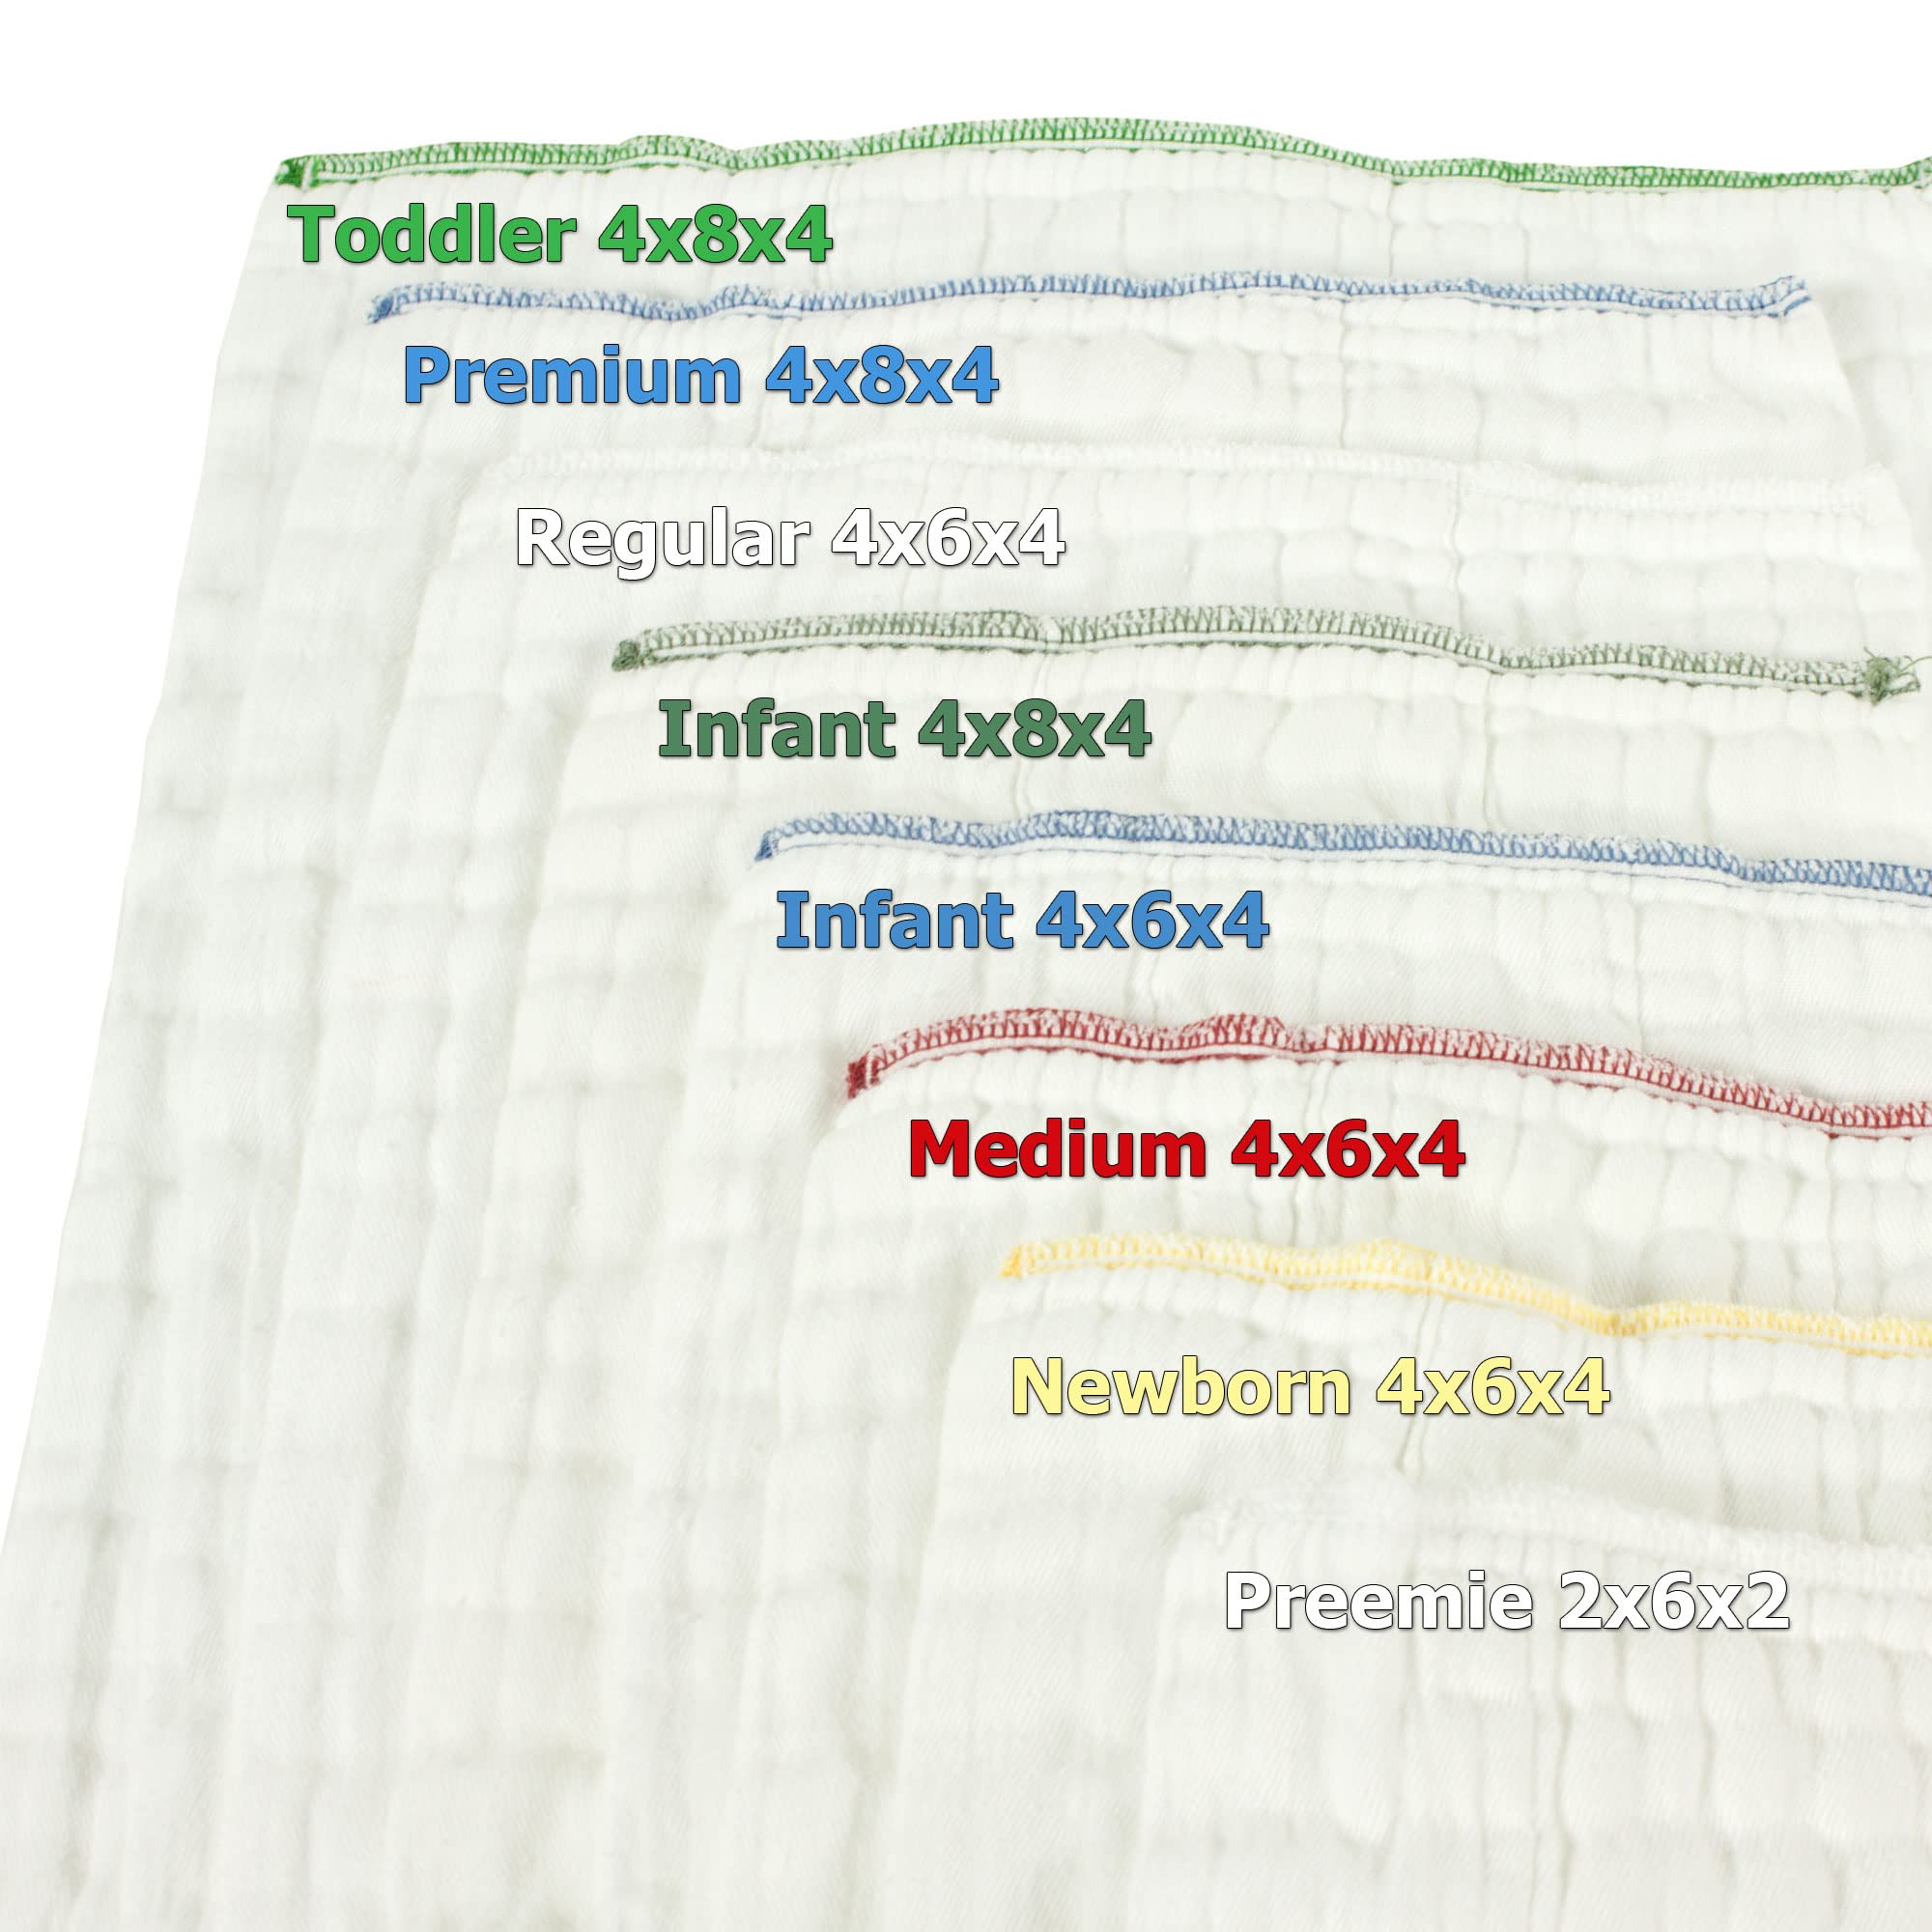 OsoCozy - Indian Cotton Prefolds (Dozen) - Soft and Absorbent Baby Diapers Made of 100% Indian Cotton - 12